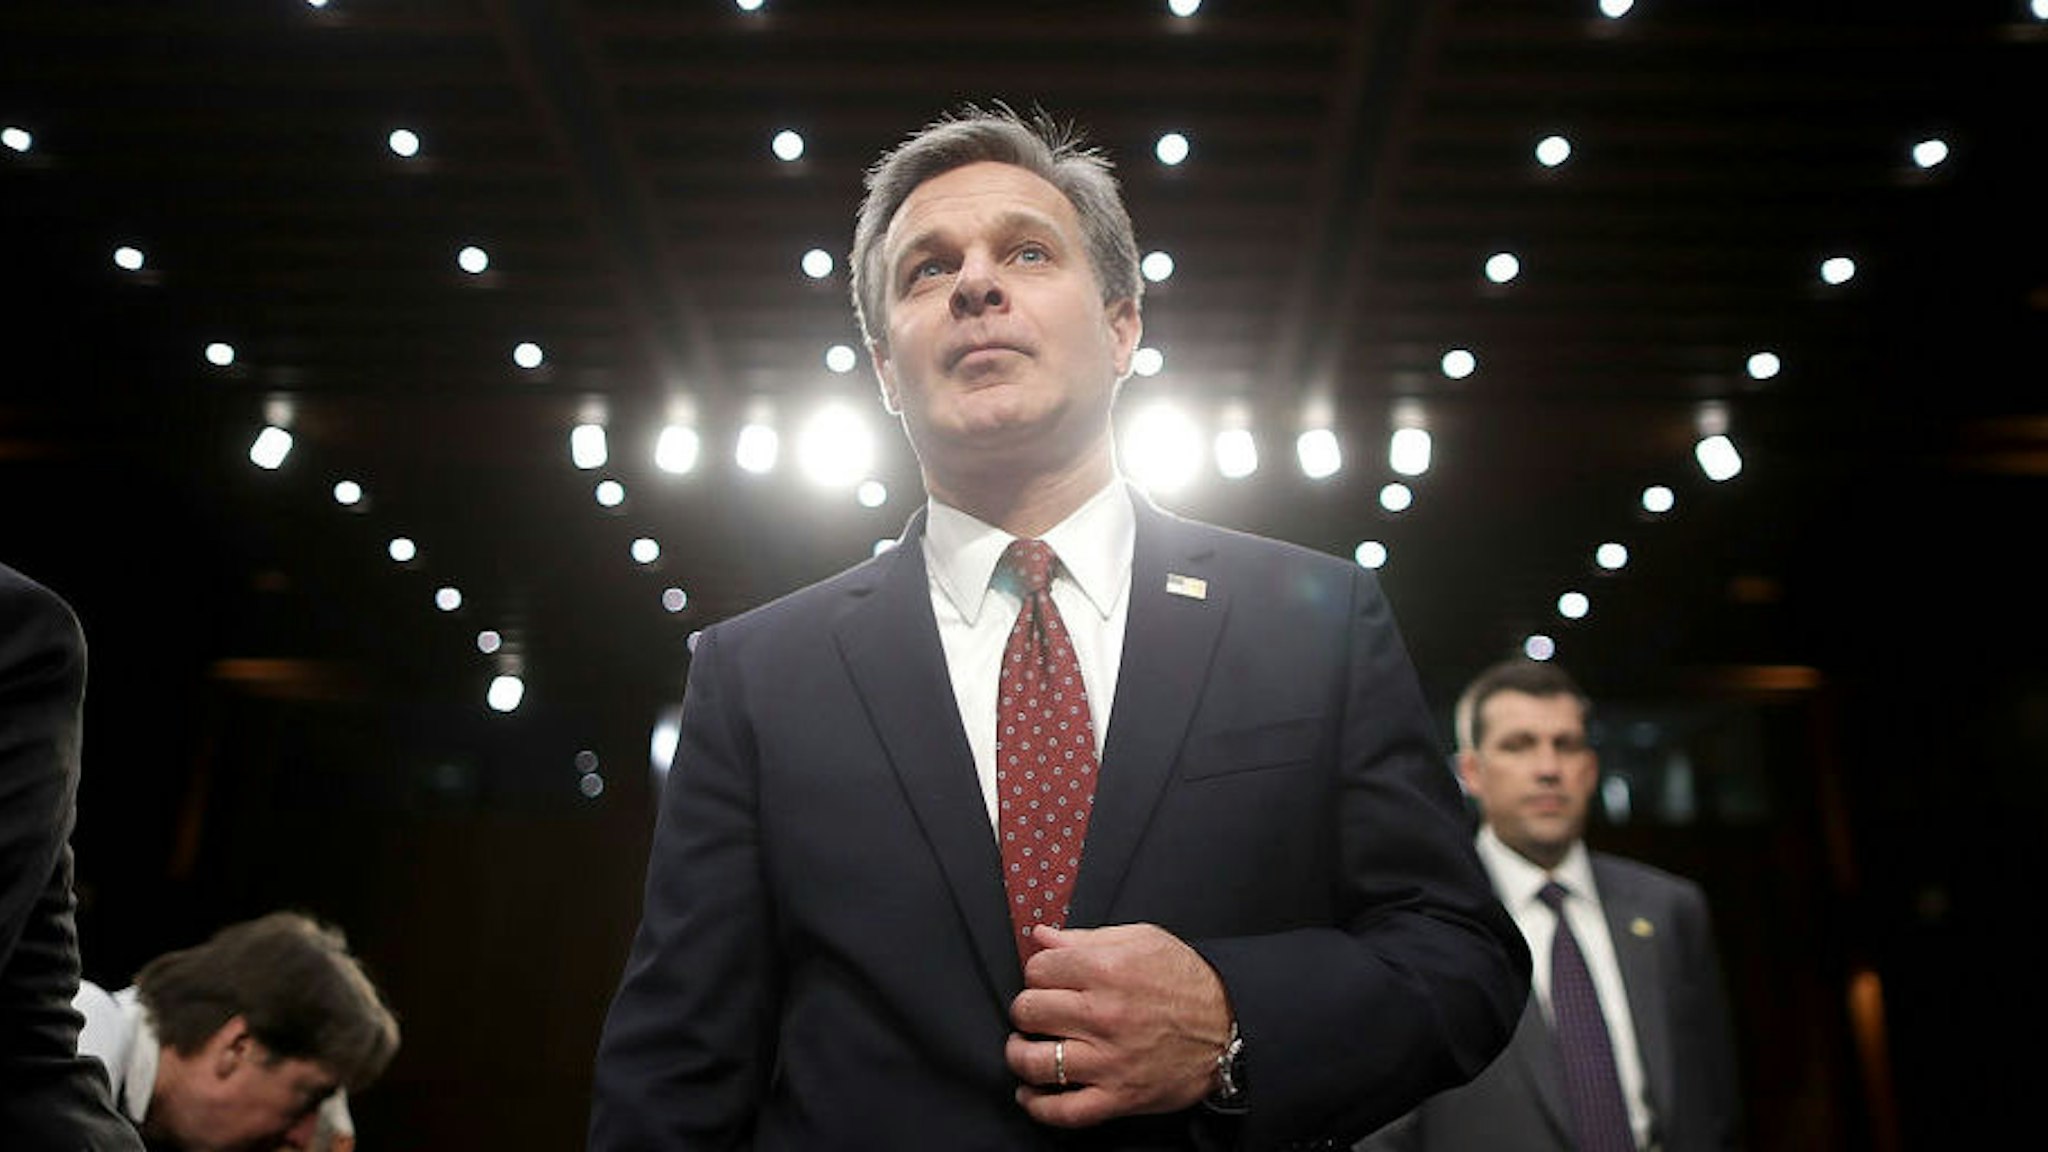 Federal Bureau of Investigation Director Christopher Wray arrives to testify before the Judiciary Committee in the Hart Senate Office Building on Capitol Hill June 18, 2018 in Washington, DC. According to a report by Justice Department Inspector General Michael Horowitz, former FBI Director James Comey and other top officials did not follow standard procedures in their handling of the 2016 investigation into Hillary Clinton's email server, but did not find any evidence of political bias. (Photo by Chip Somodevilla/Getty Images)